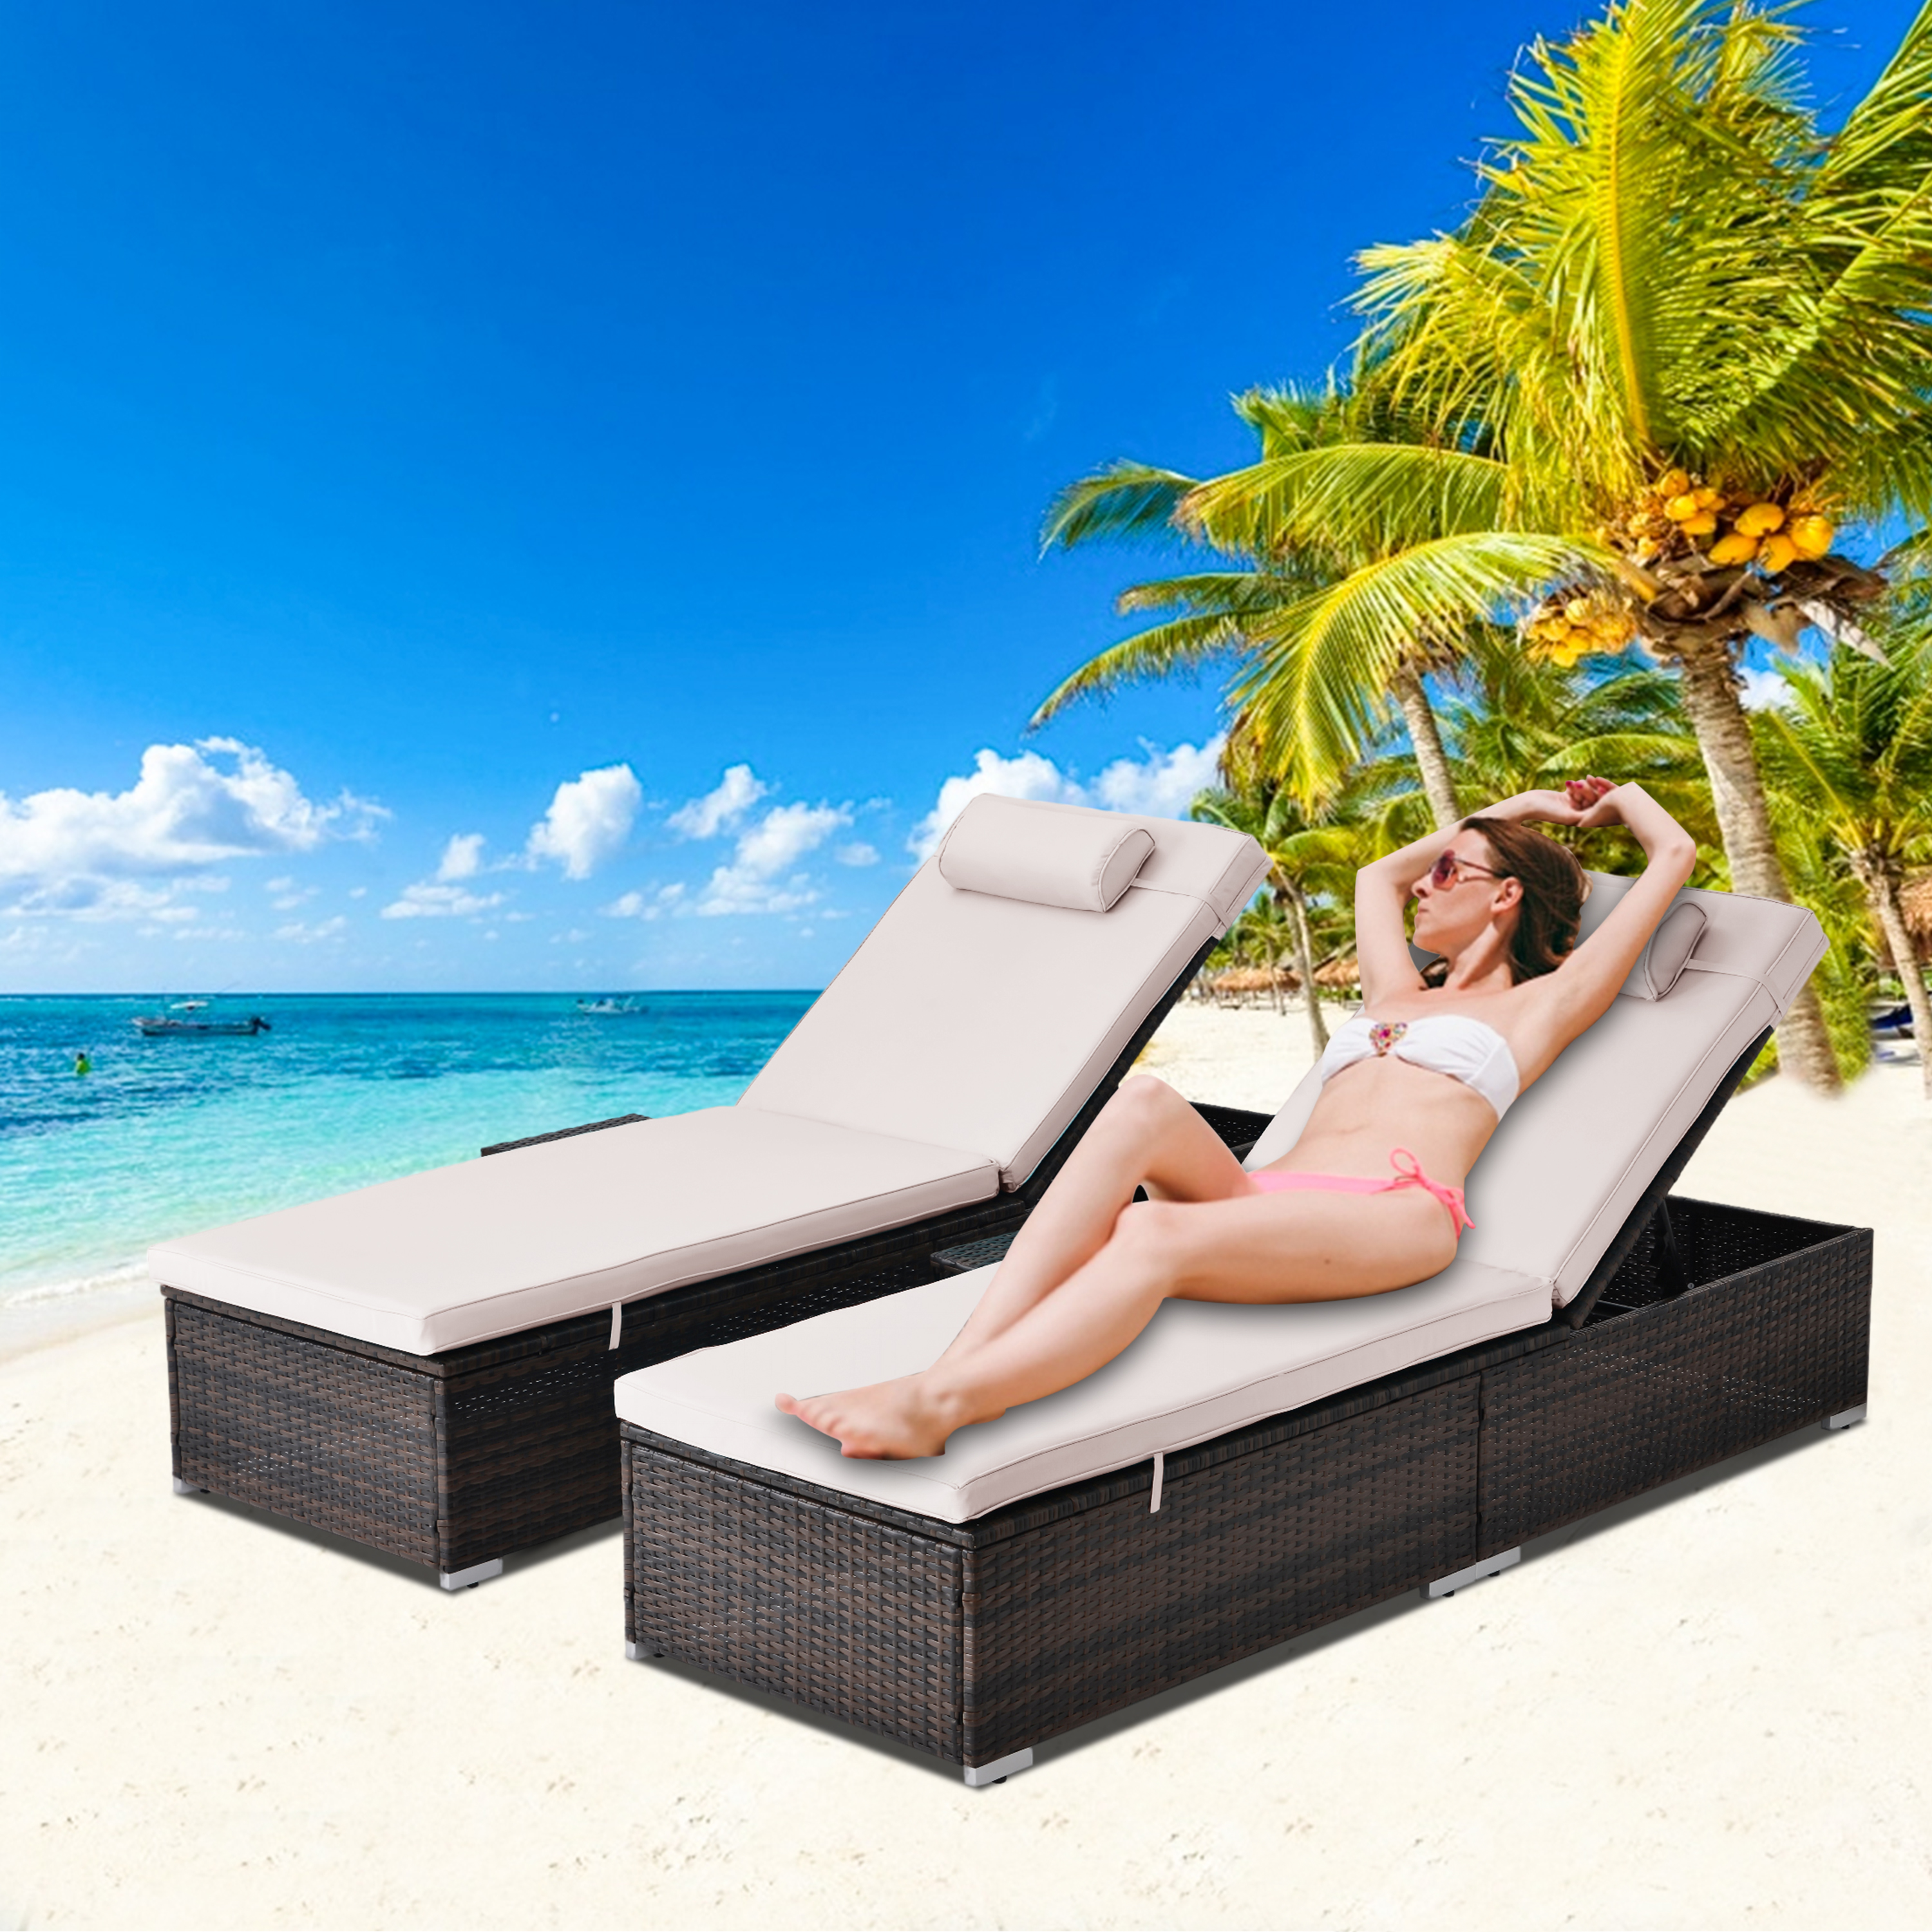 Segmart Outdoor Patio Chaise Lounge Chairs Furniture Set, PE Rattan Wicker Beach Pool Lounge Chair with Side Table, Adjustable 5 Position, Reclining Chaise Chairs, Beige, SS2350 - image 1 of 8